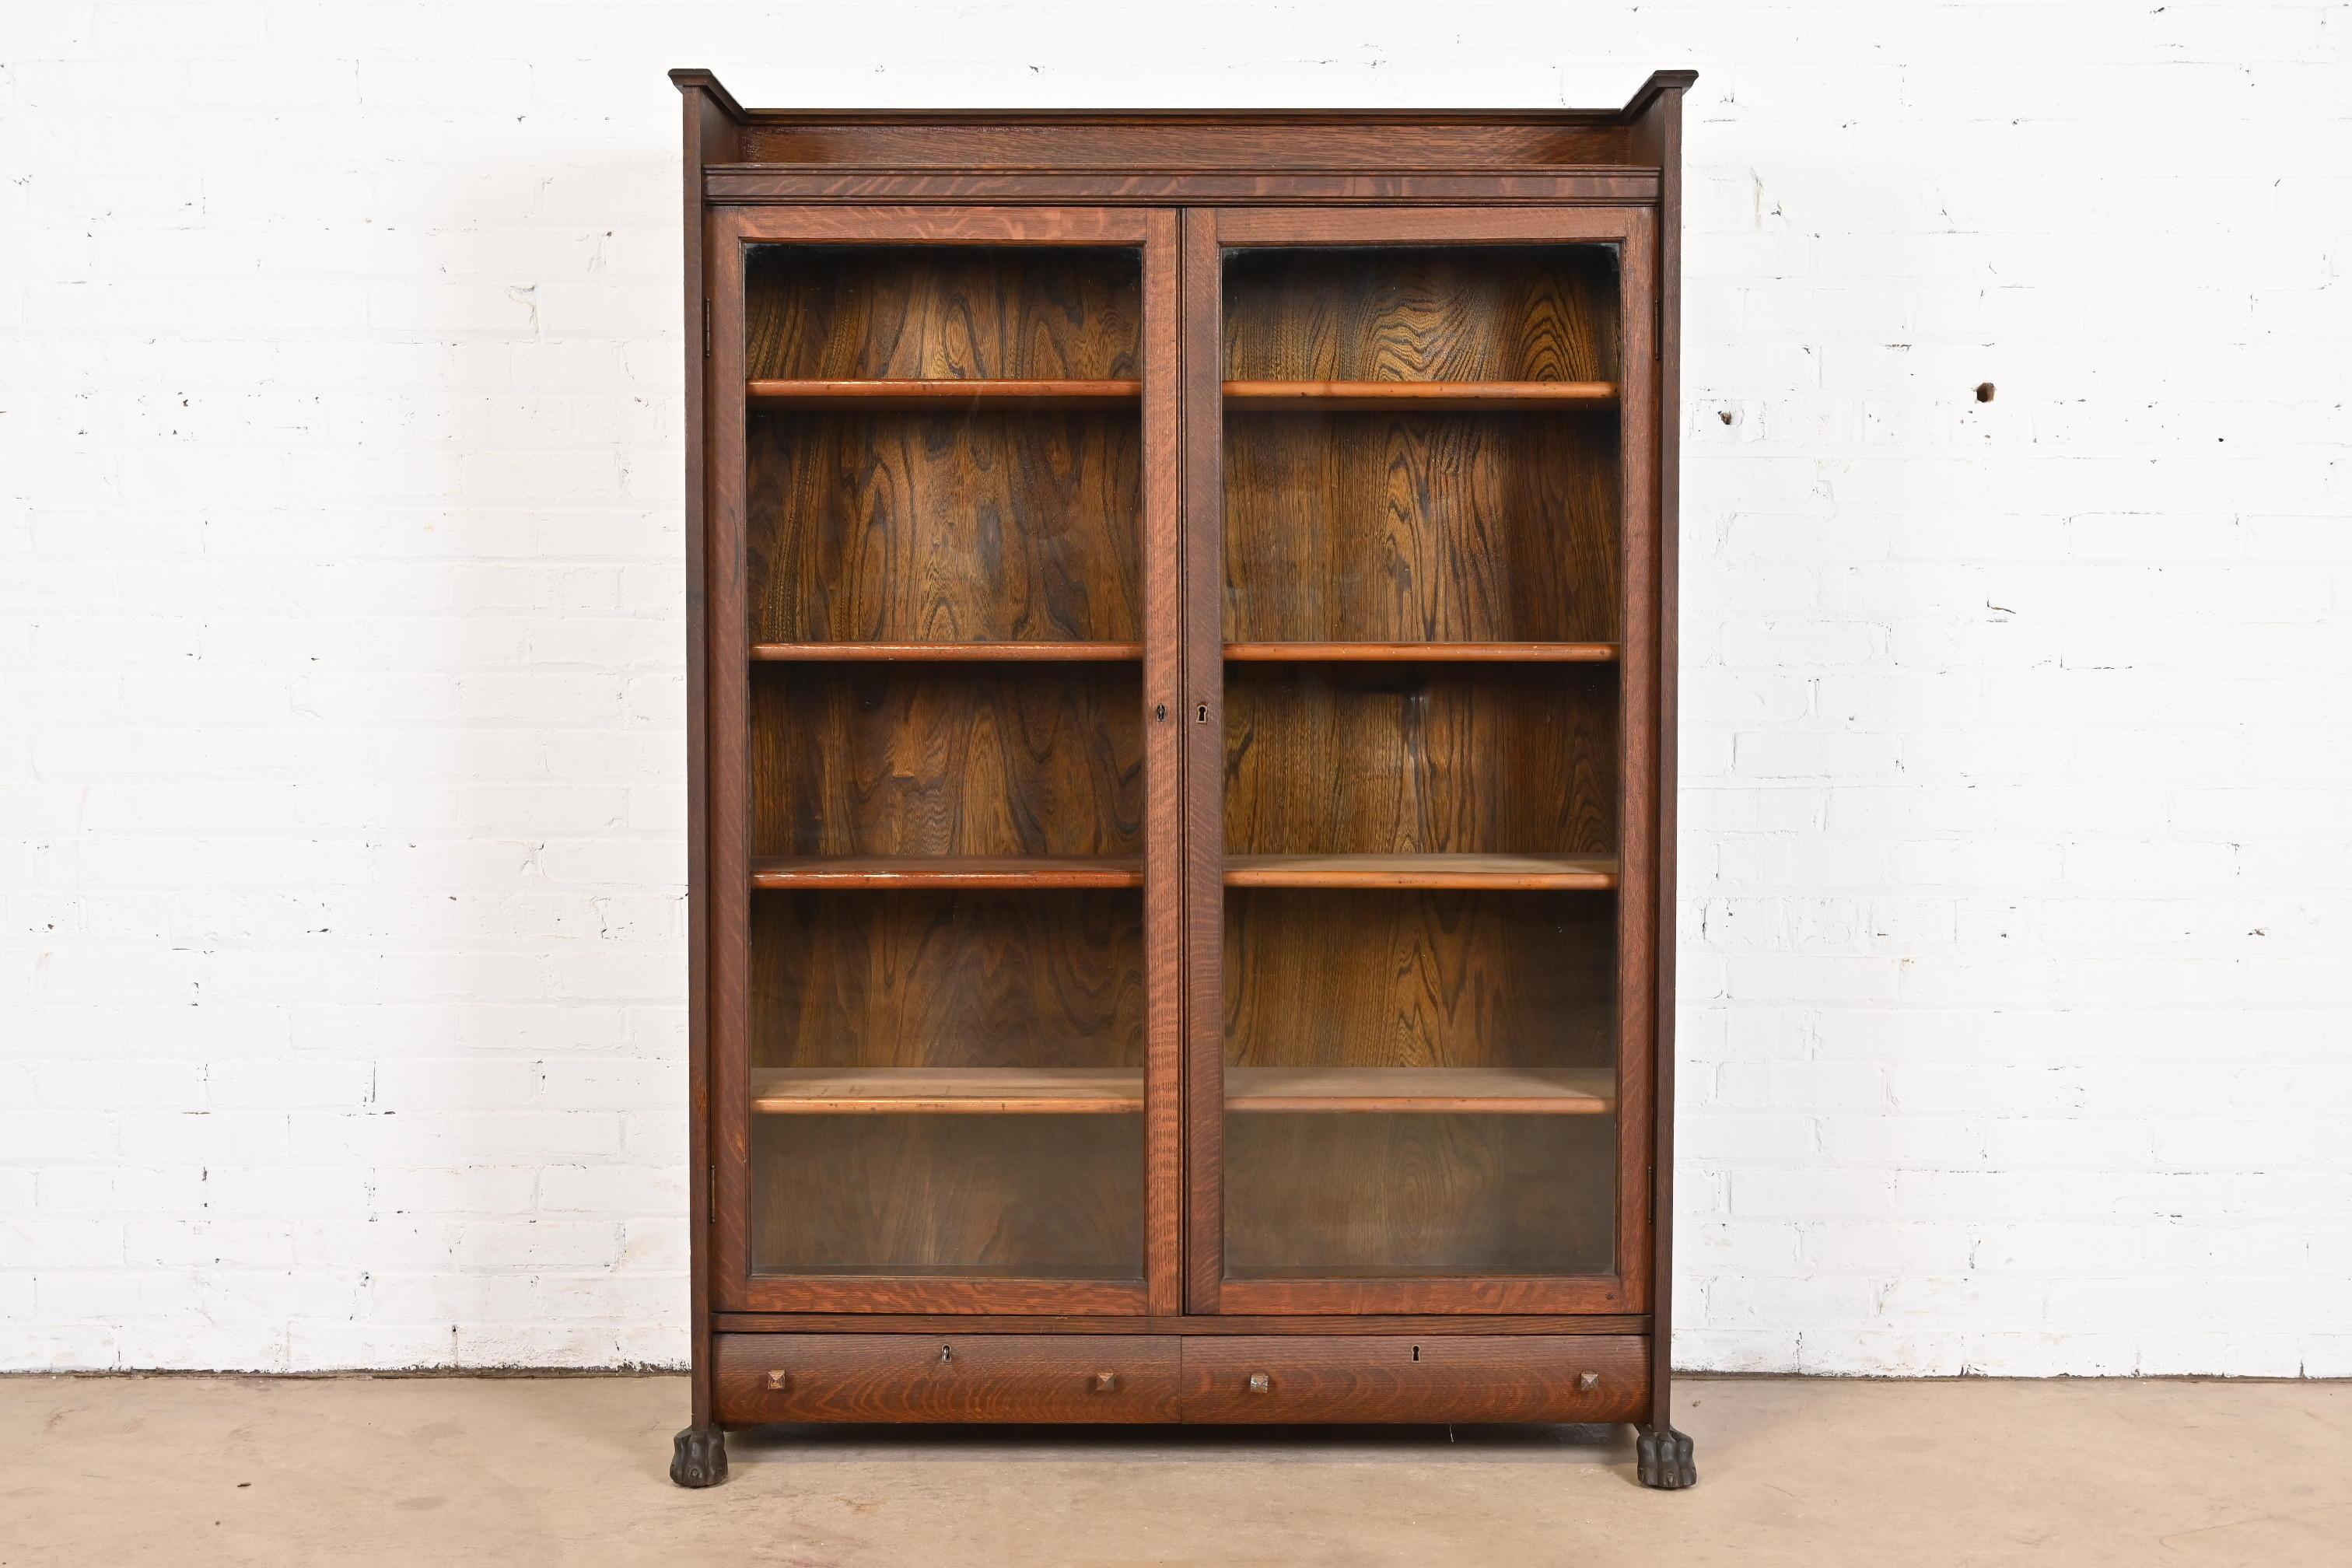 A gorgeous antique Mission or Arts & Crafts double bookcase cabinet over two drawers

In the manner of Stickley Brothers

USA, Circa 1900

Oak, with carved paw feet, glass front doors, and copper drawer pulls. Cabinet locks, and key is